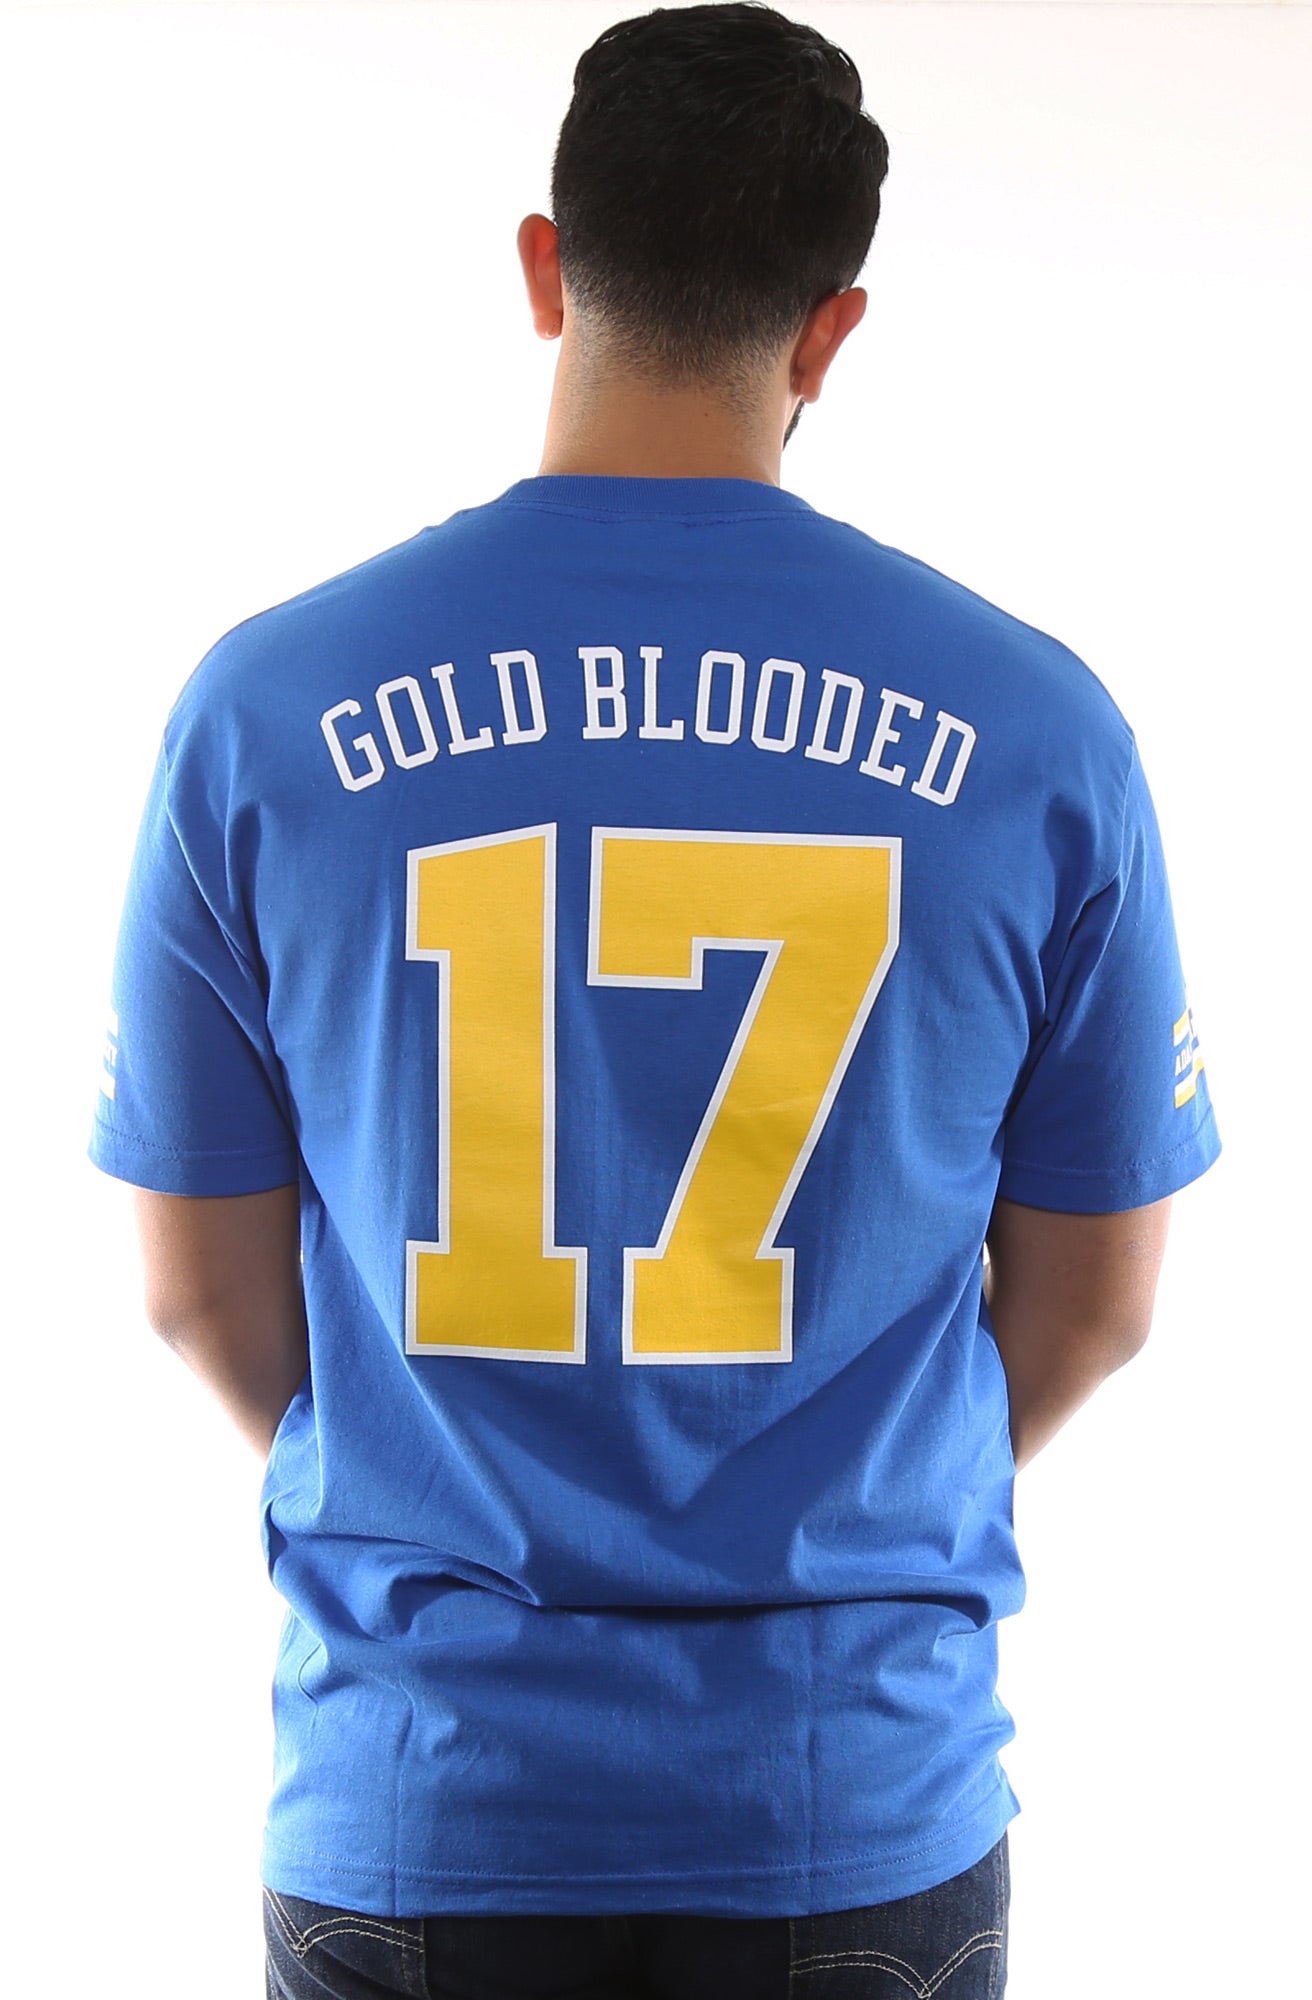 LAST CALL - Gold Blooded Royalty :: 17 (Men's Royal Tee)